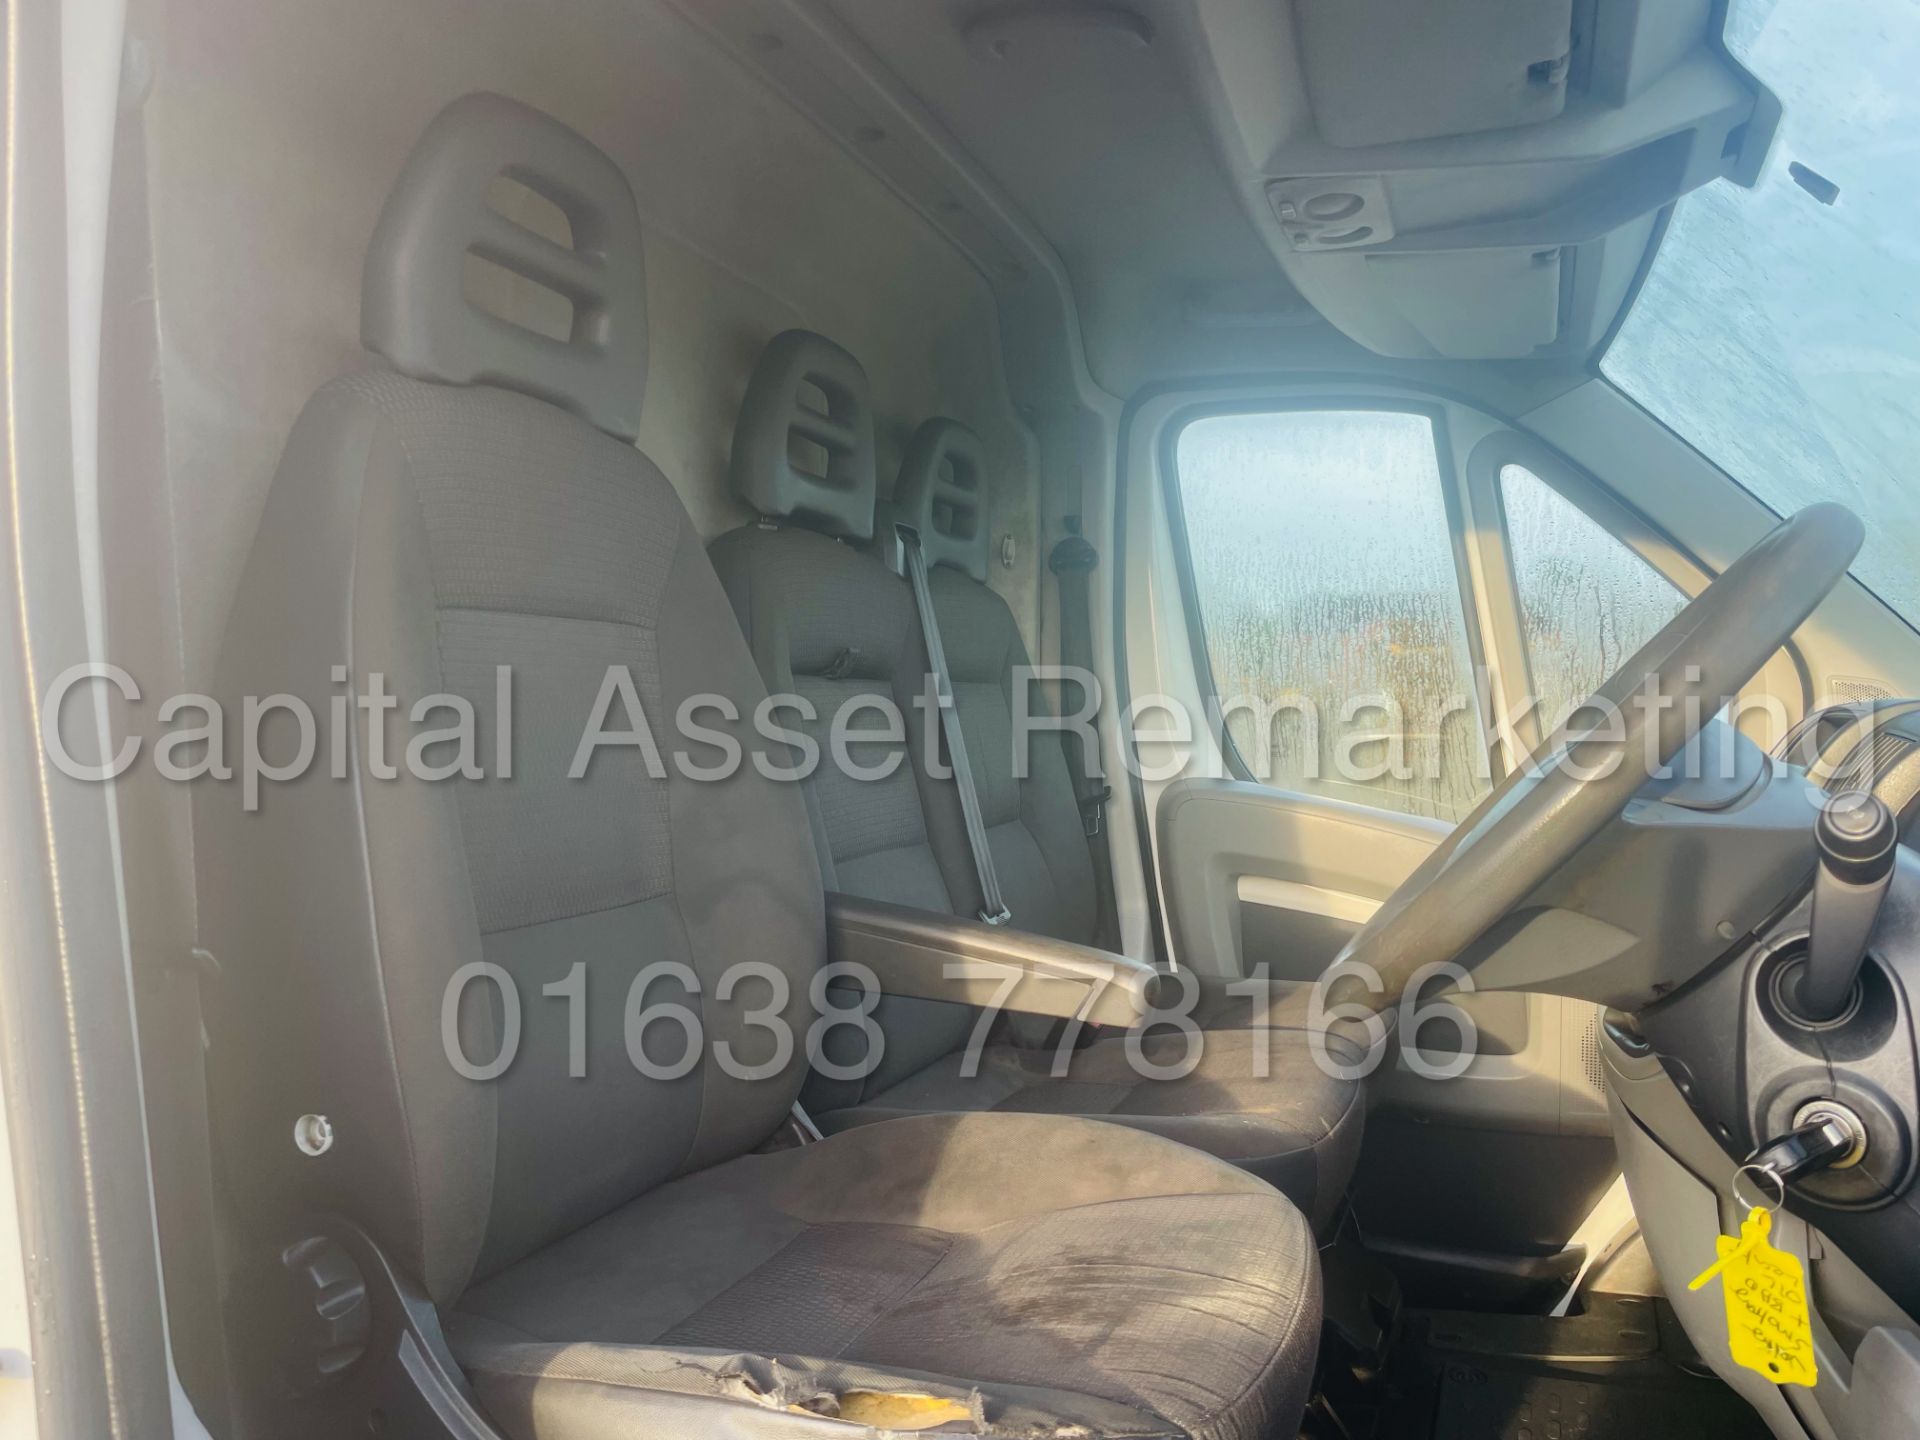 (On Sale) CITROEN RELAY 35 *LWB - EXTRA HI-ROOF* (2011) '2.2 HDI - 120 BHP - 6 SPEED' (3500 KG) - Image 22 of 32